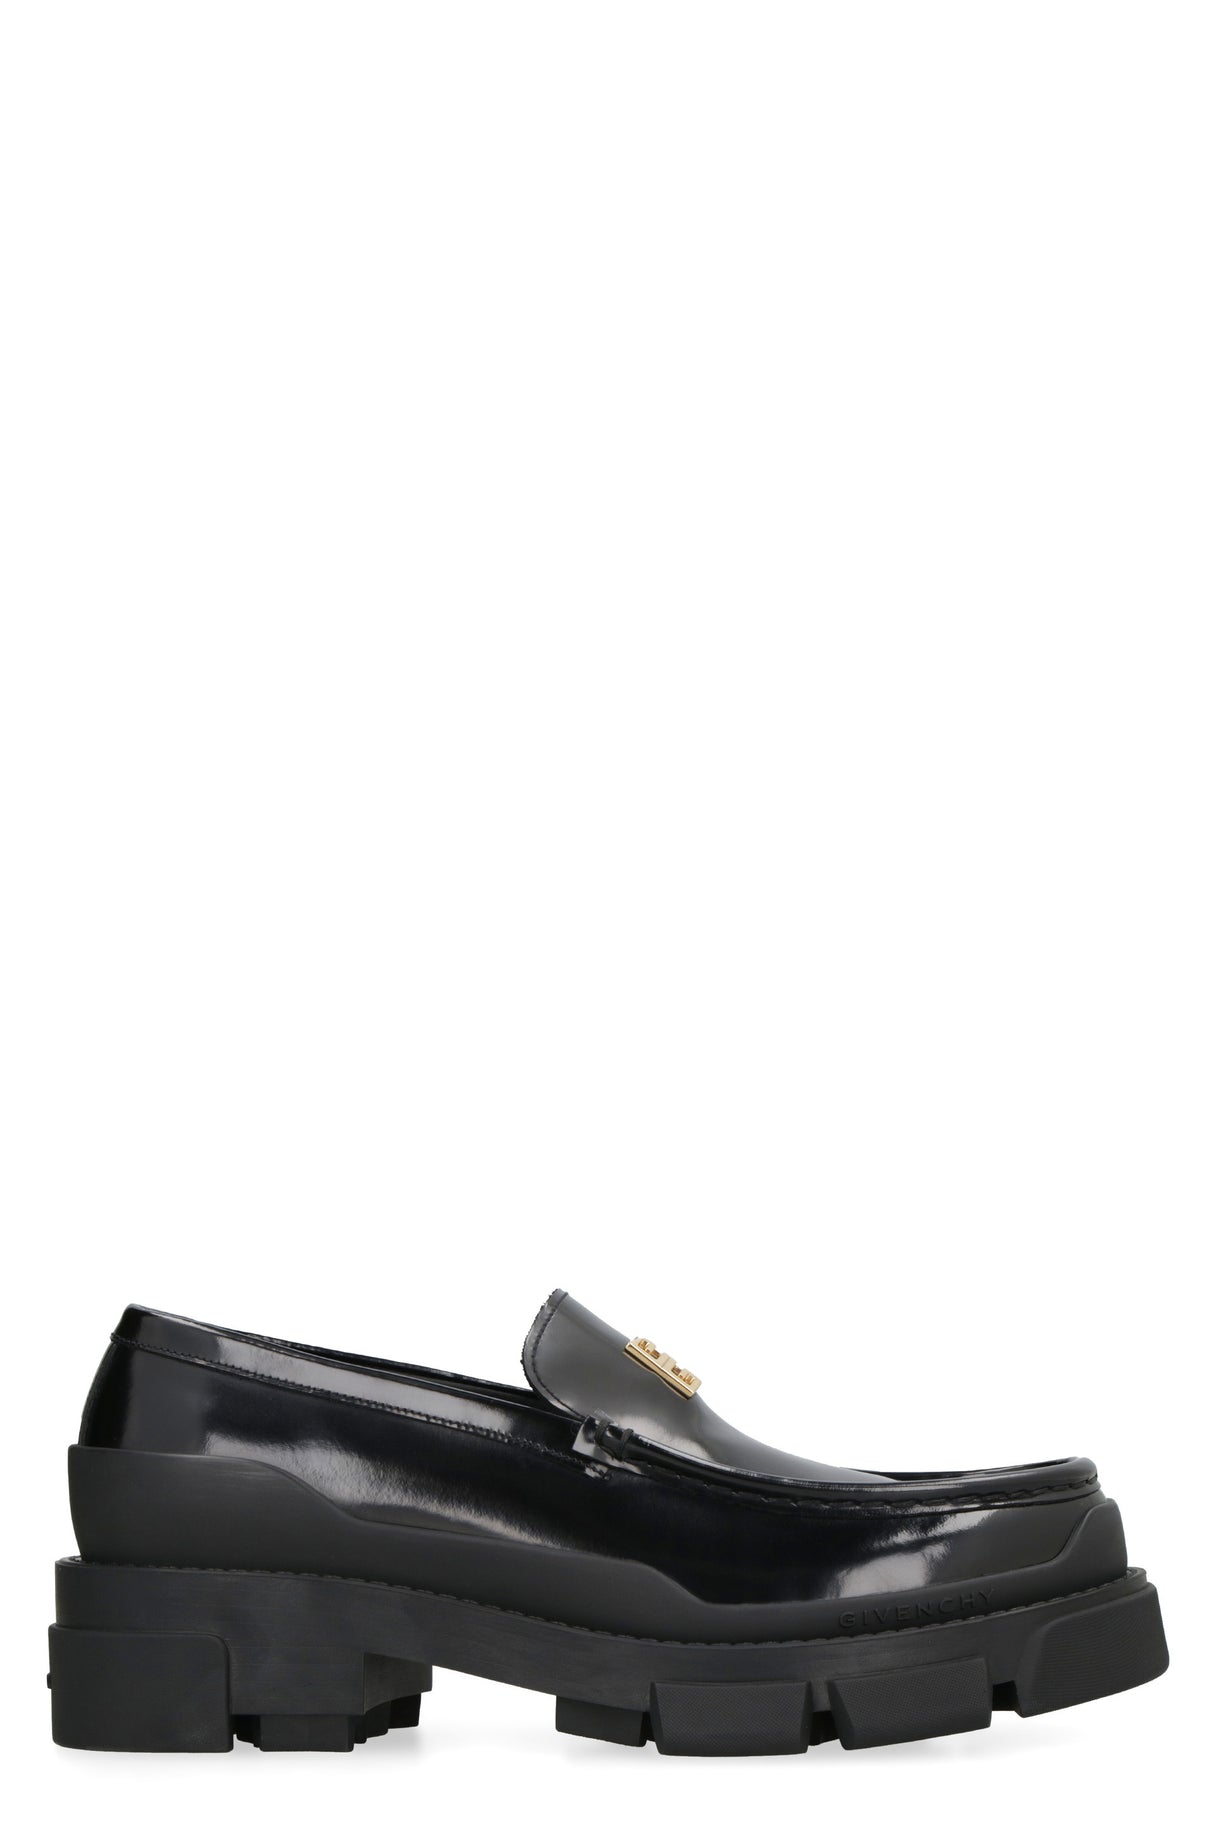 GIVENCHY Stylish Black Leather Loafers for Women - FW23 Collection